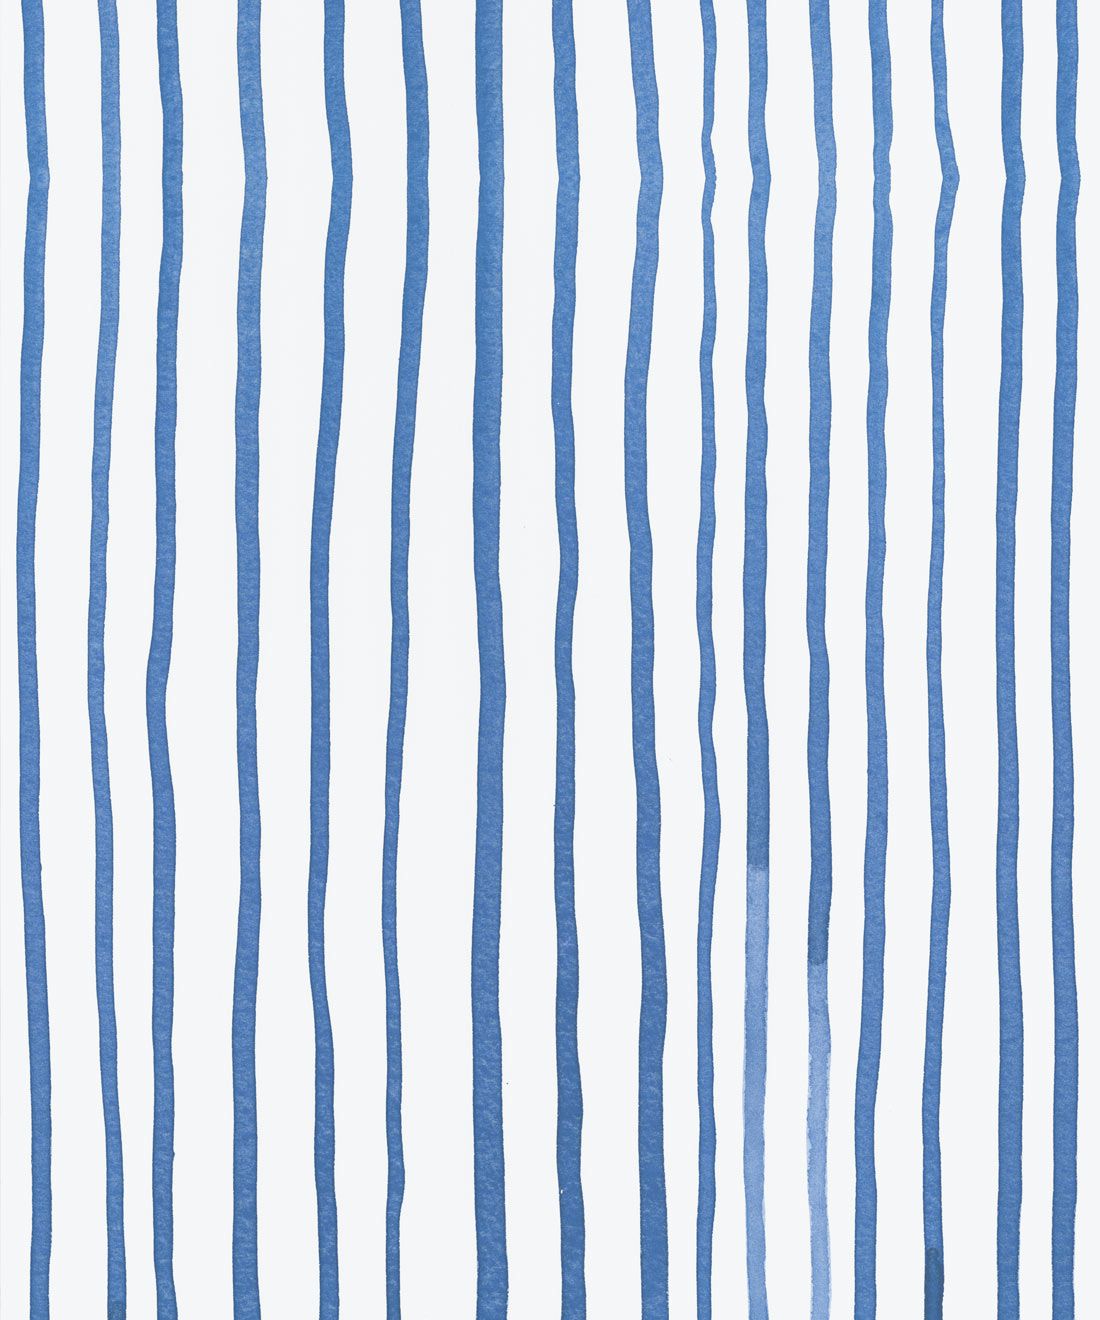 Blue And White Stripes Fabric, Wallpaper and Home Decor